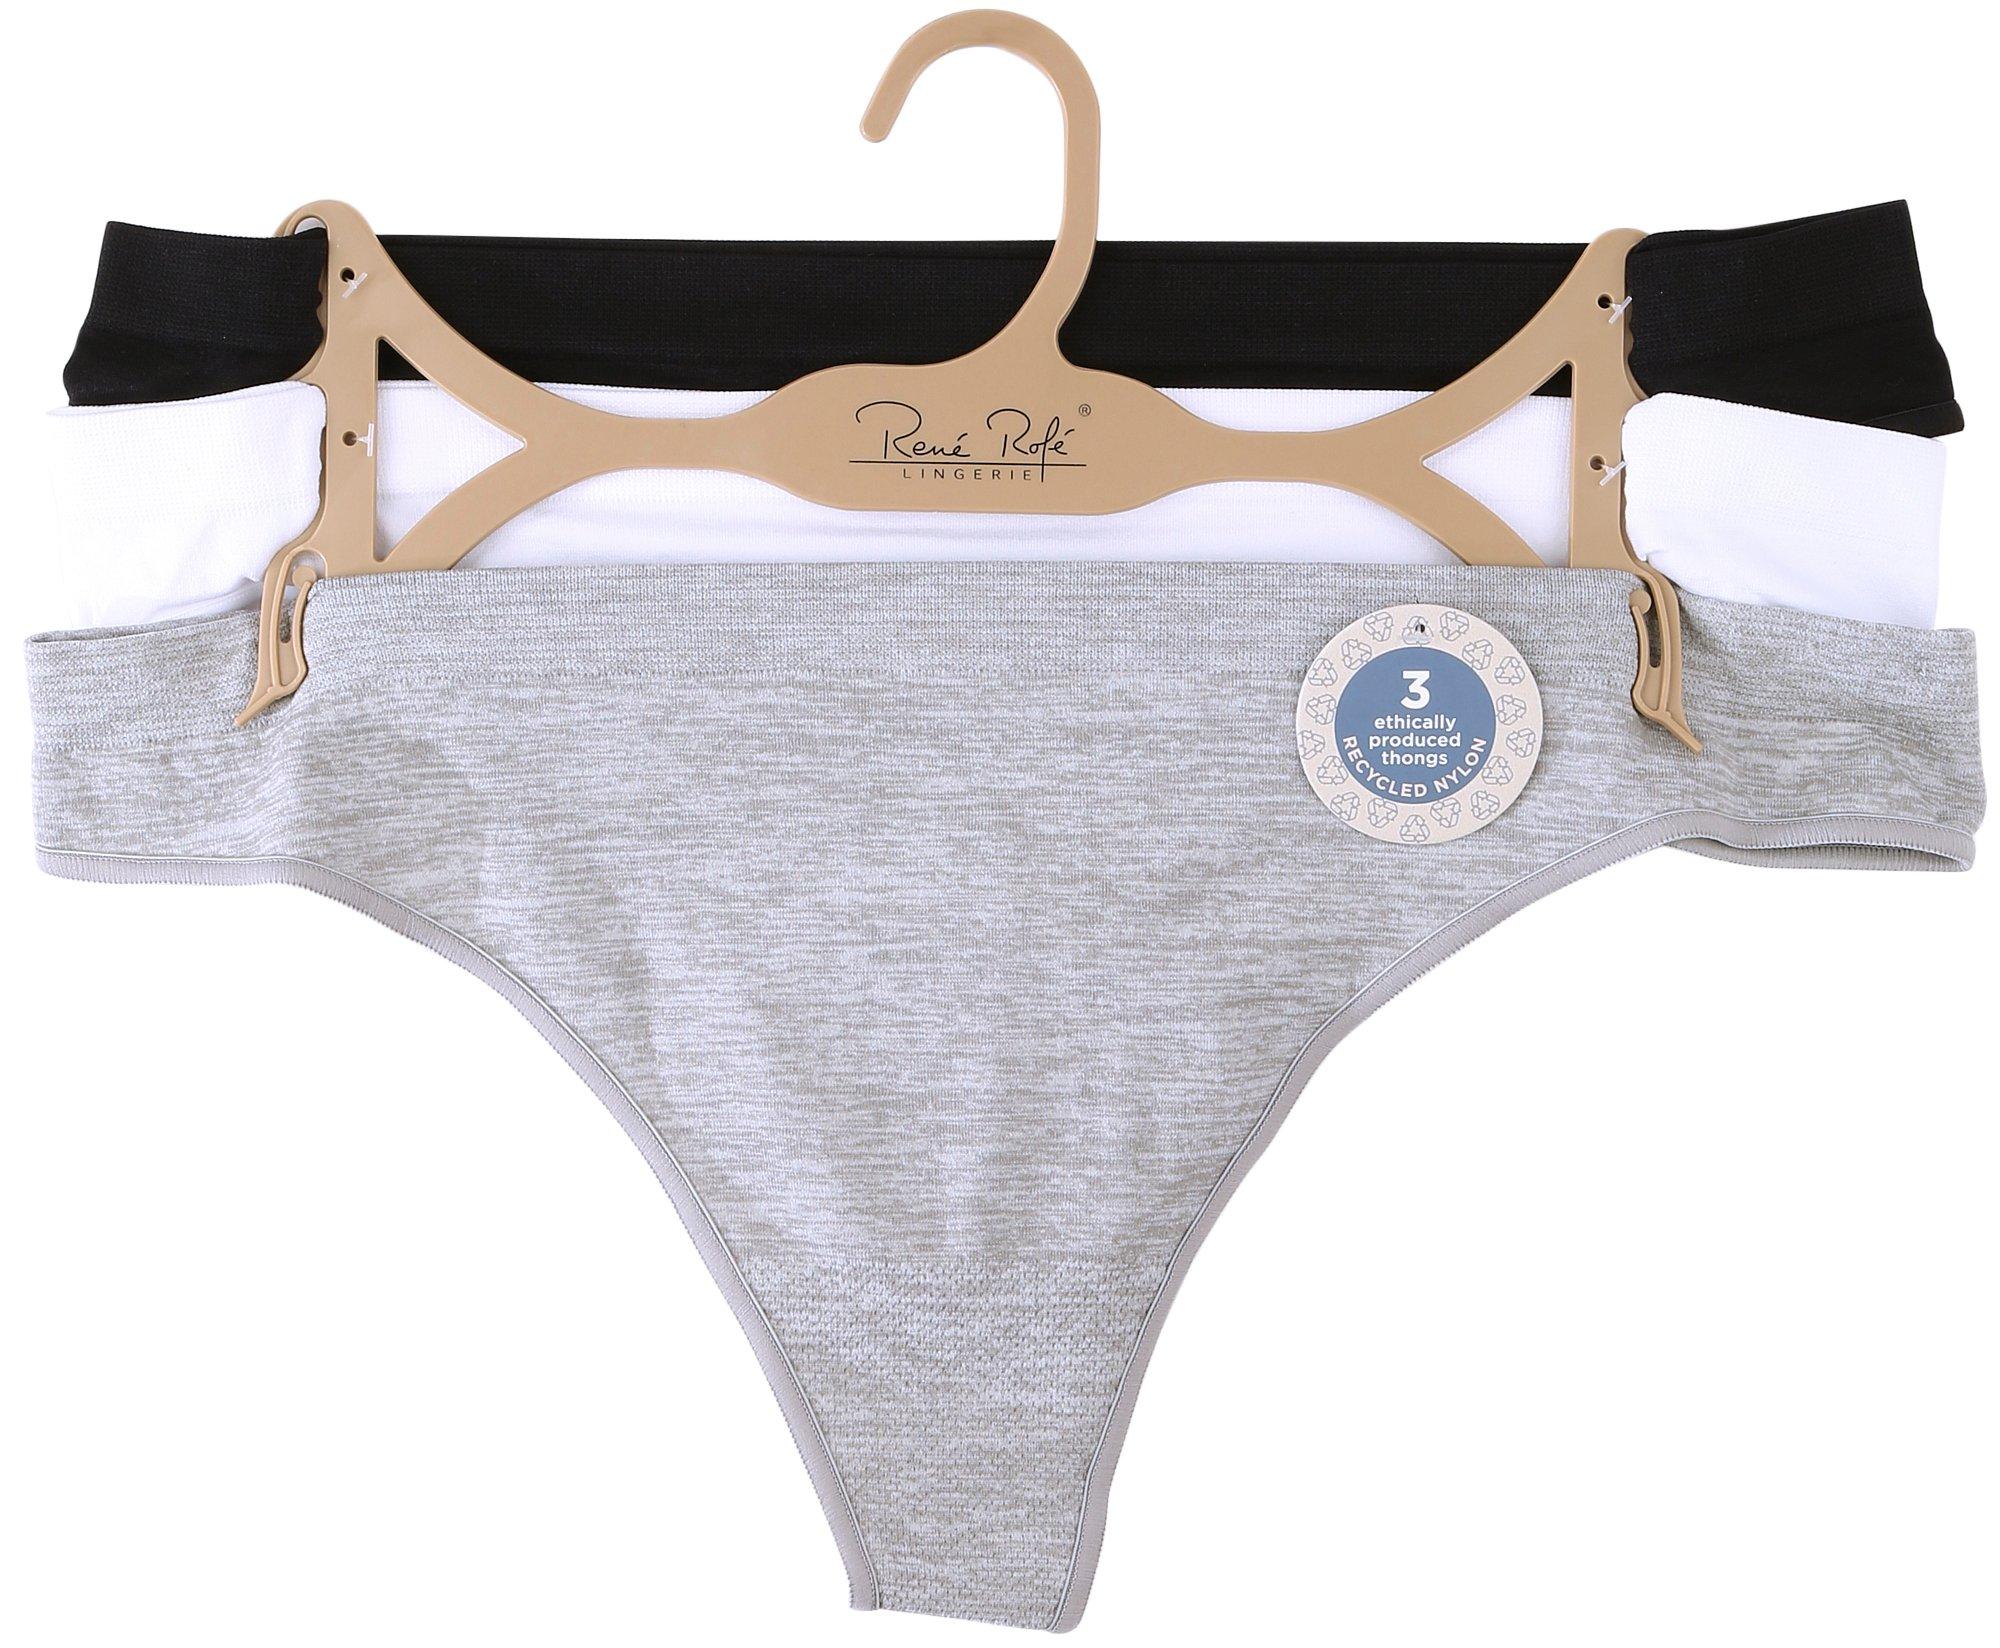 Juicy Couture Juniors 5-Pc. Branded Mesh Waist Thong Set